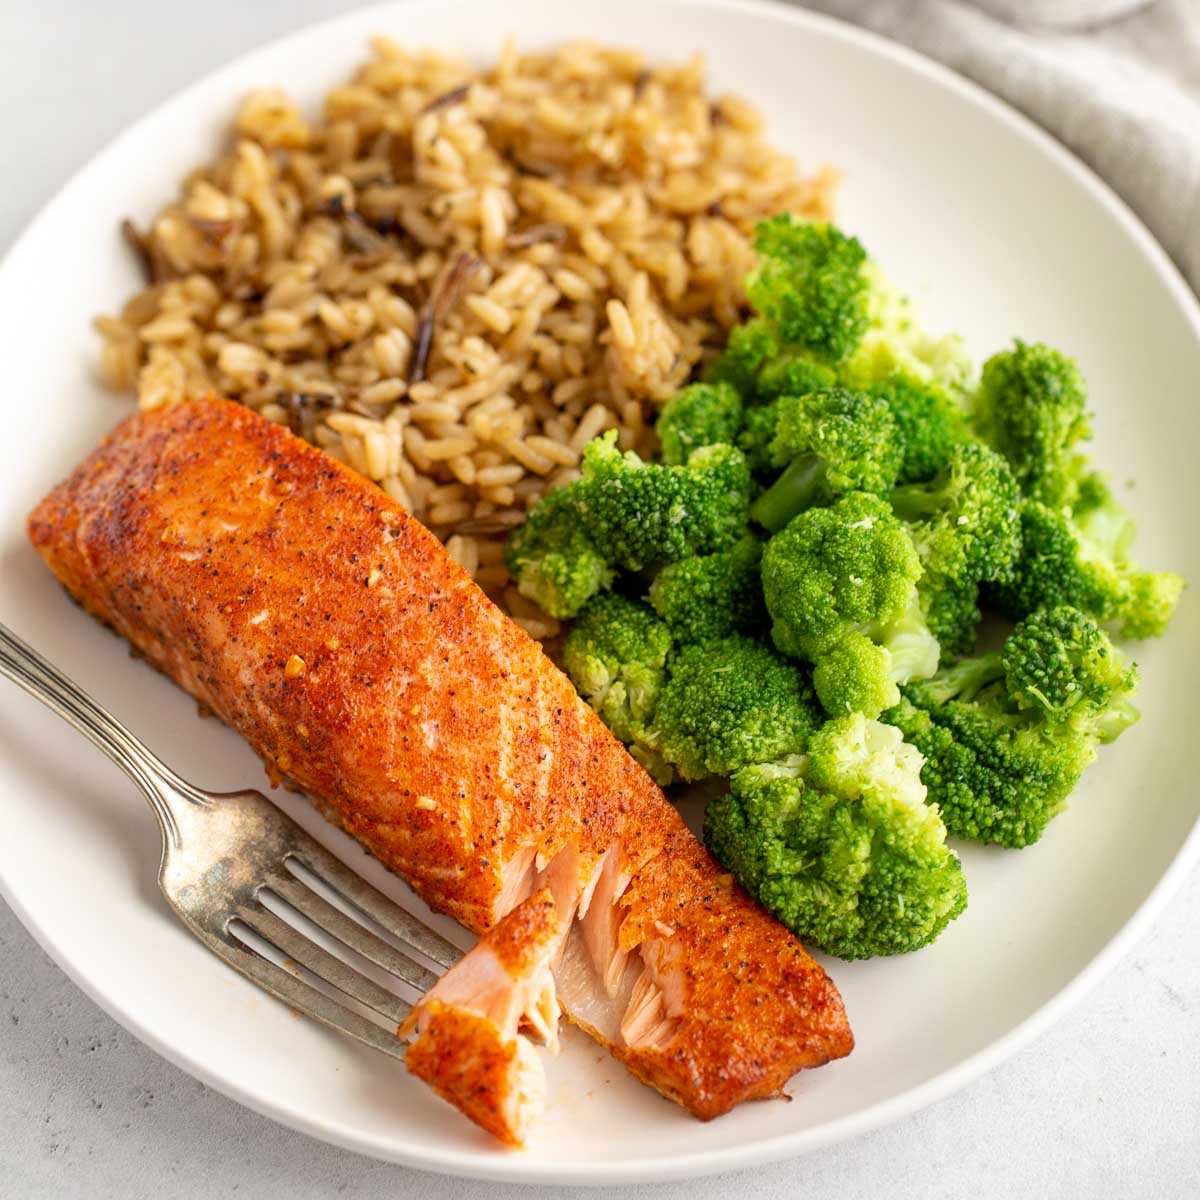 A piece of salmon on a white plate with sides of rice and broccoli.